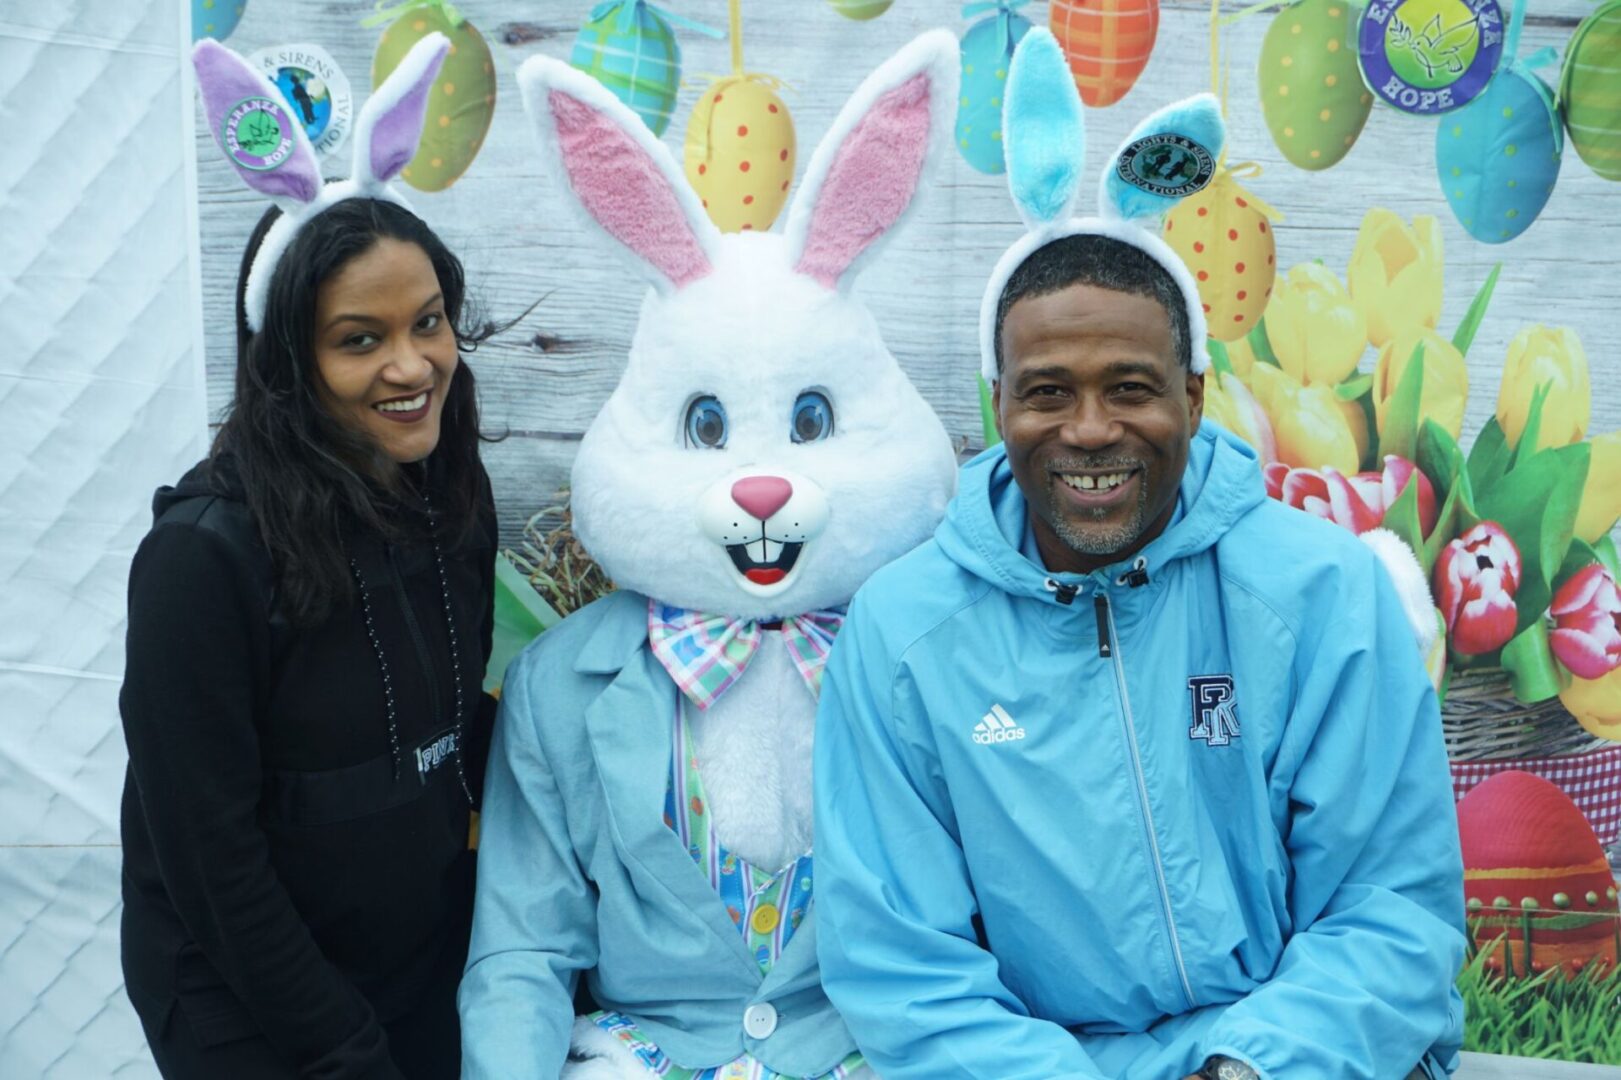 The bunny mascot and a male and female staff wearing bunny ears